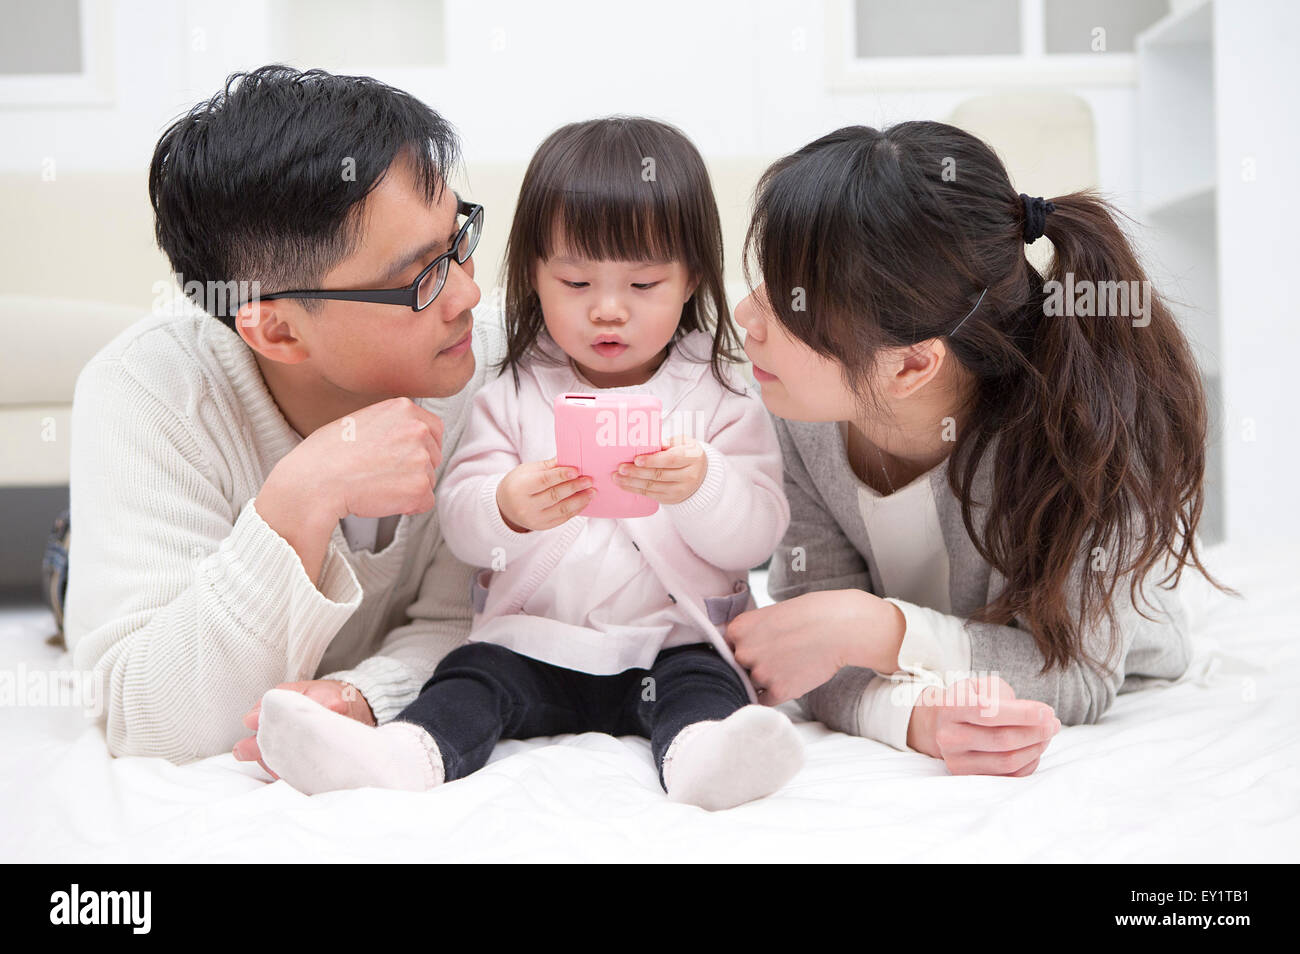 Father and mother looking at baby girl together, Stock Photo